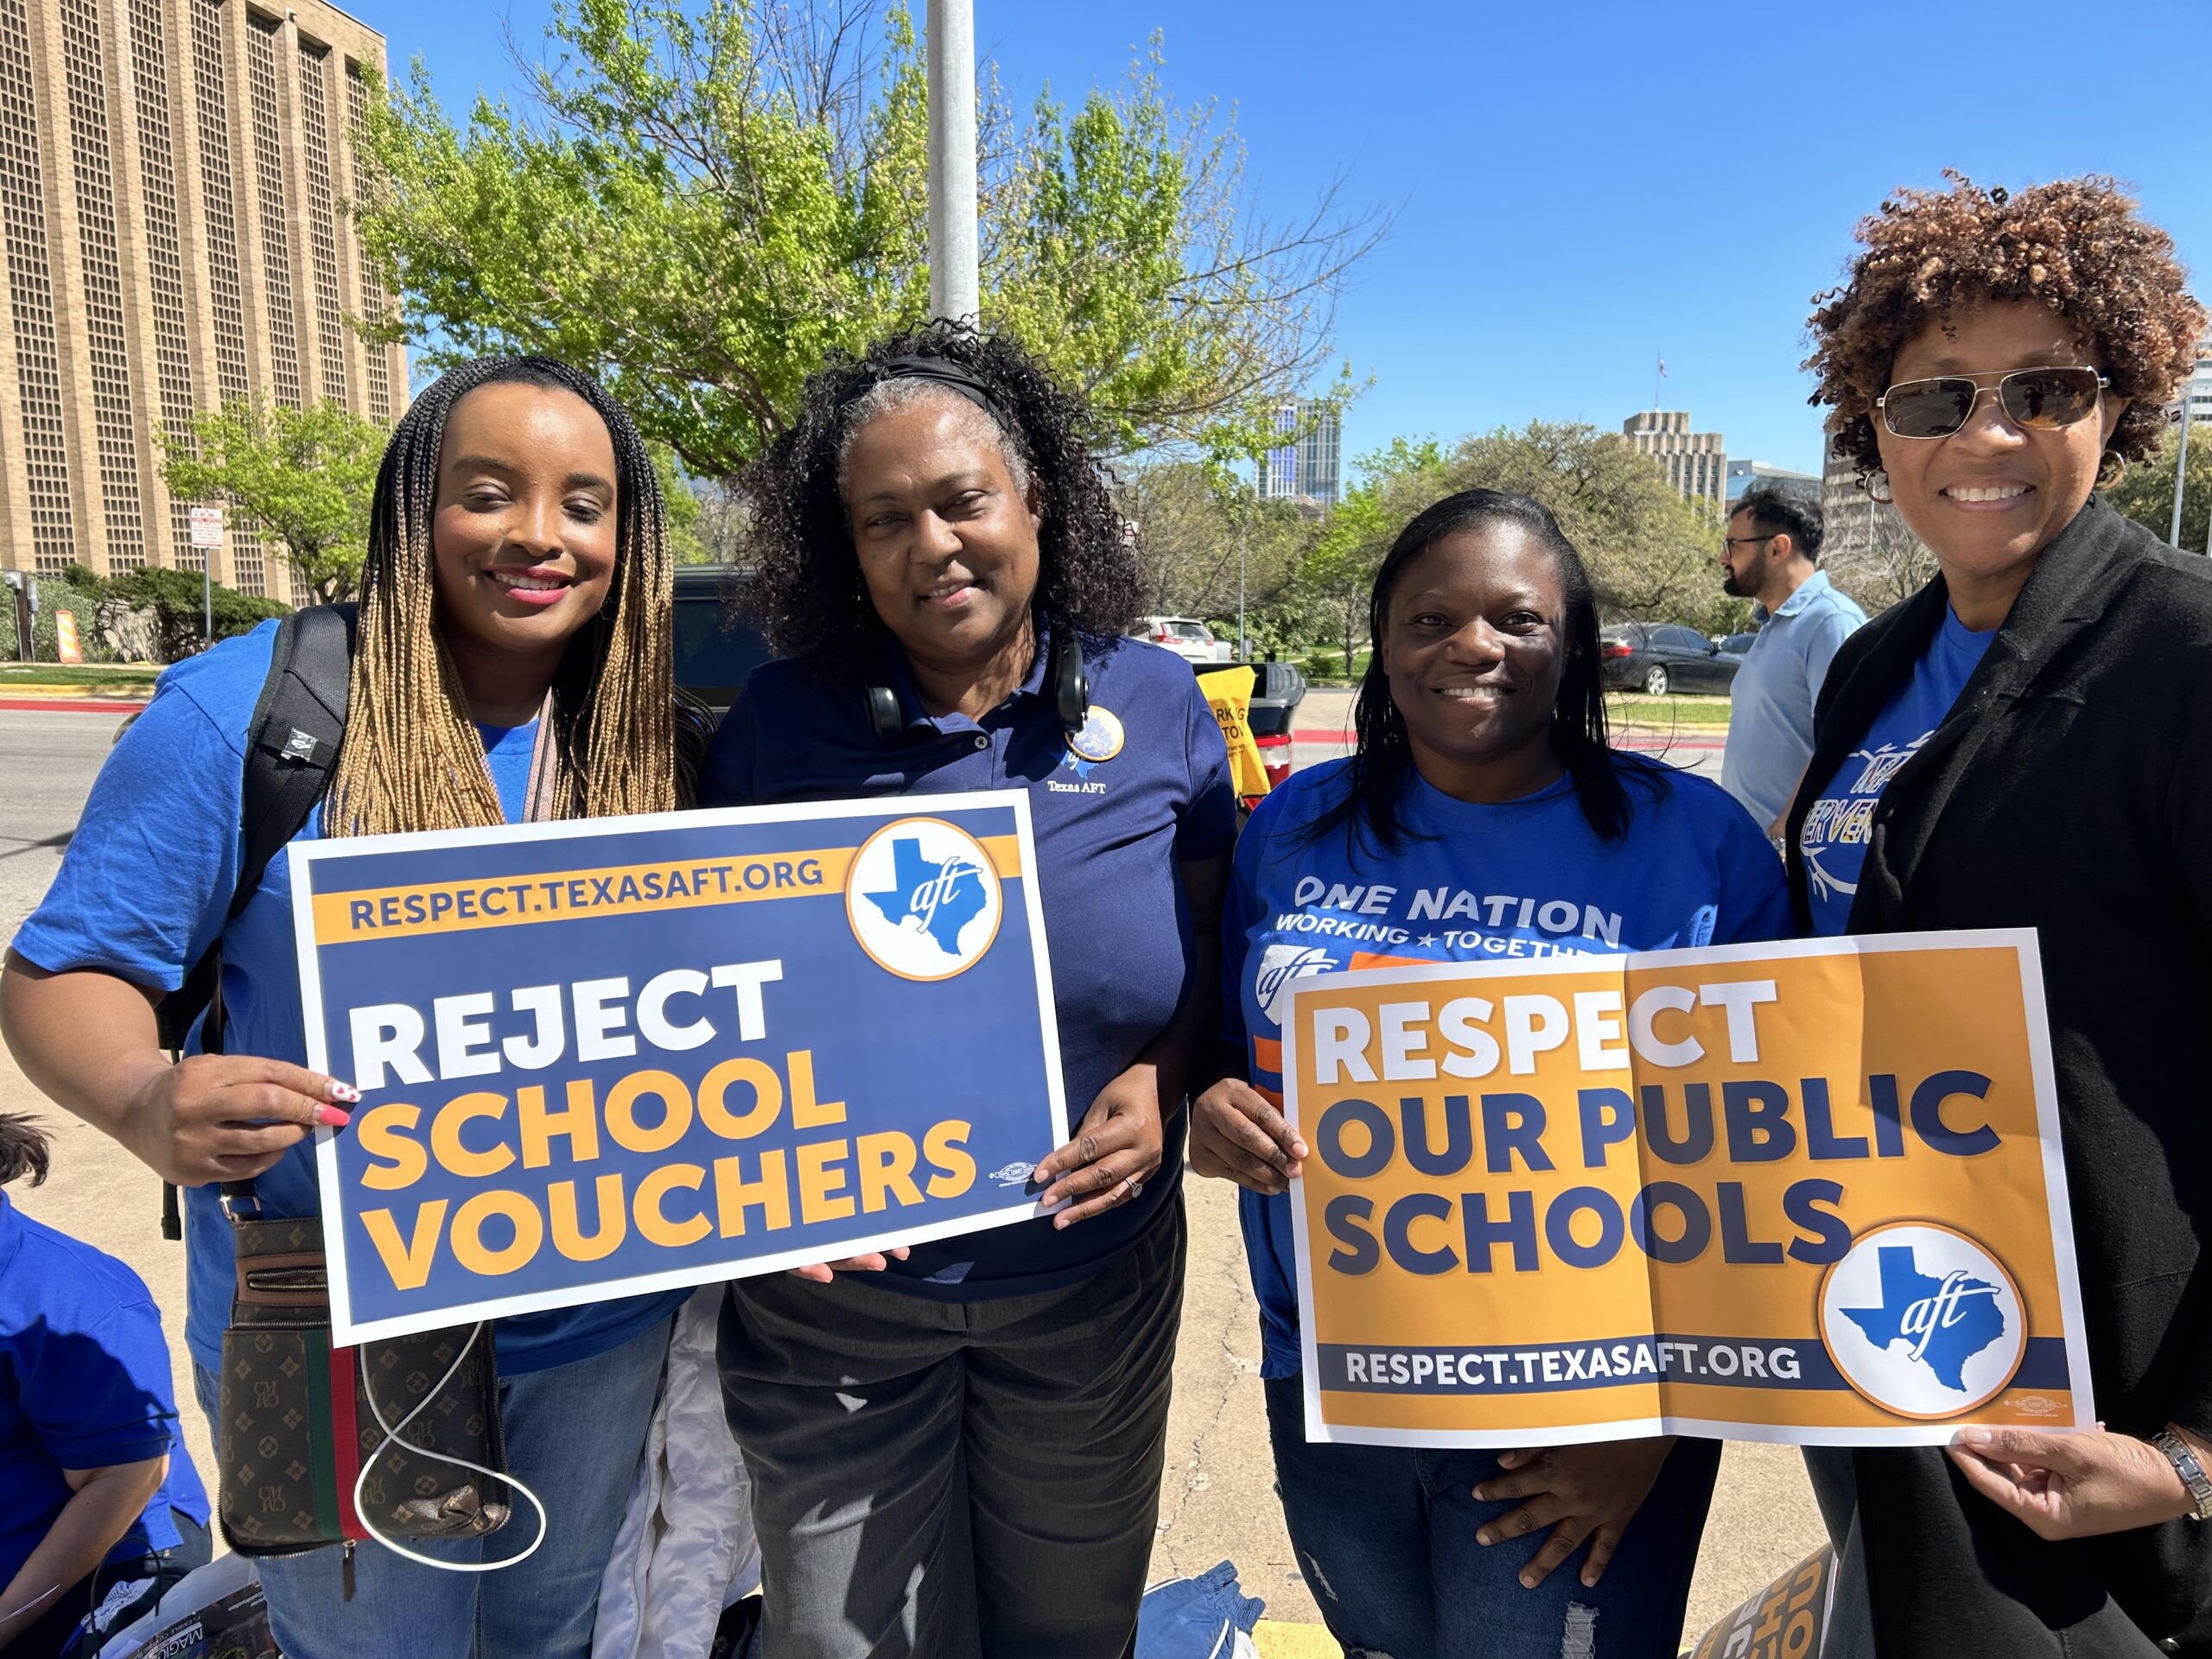 Four Black women gather outside in Austin with signs reading "Reject School Vouchers" and "Respect our public schools". Vouchers, along with property tax cuts, threaten public schools already overwhelmed by teacher attrition.